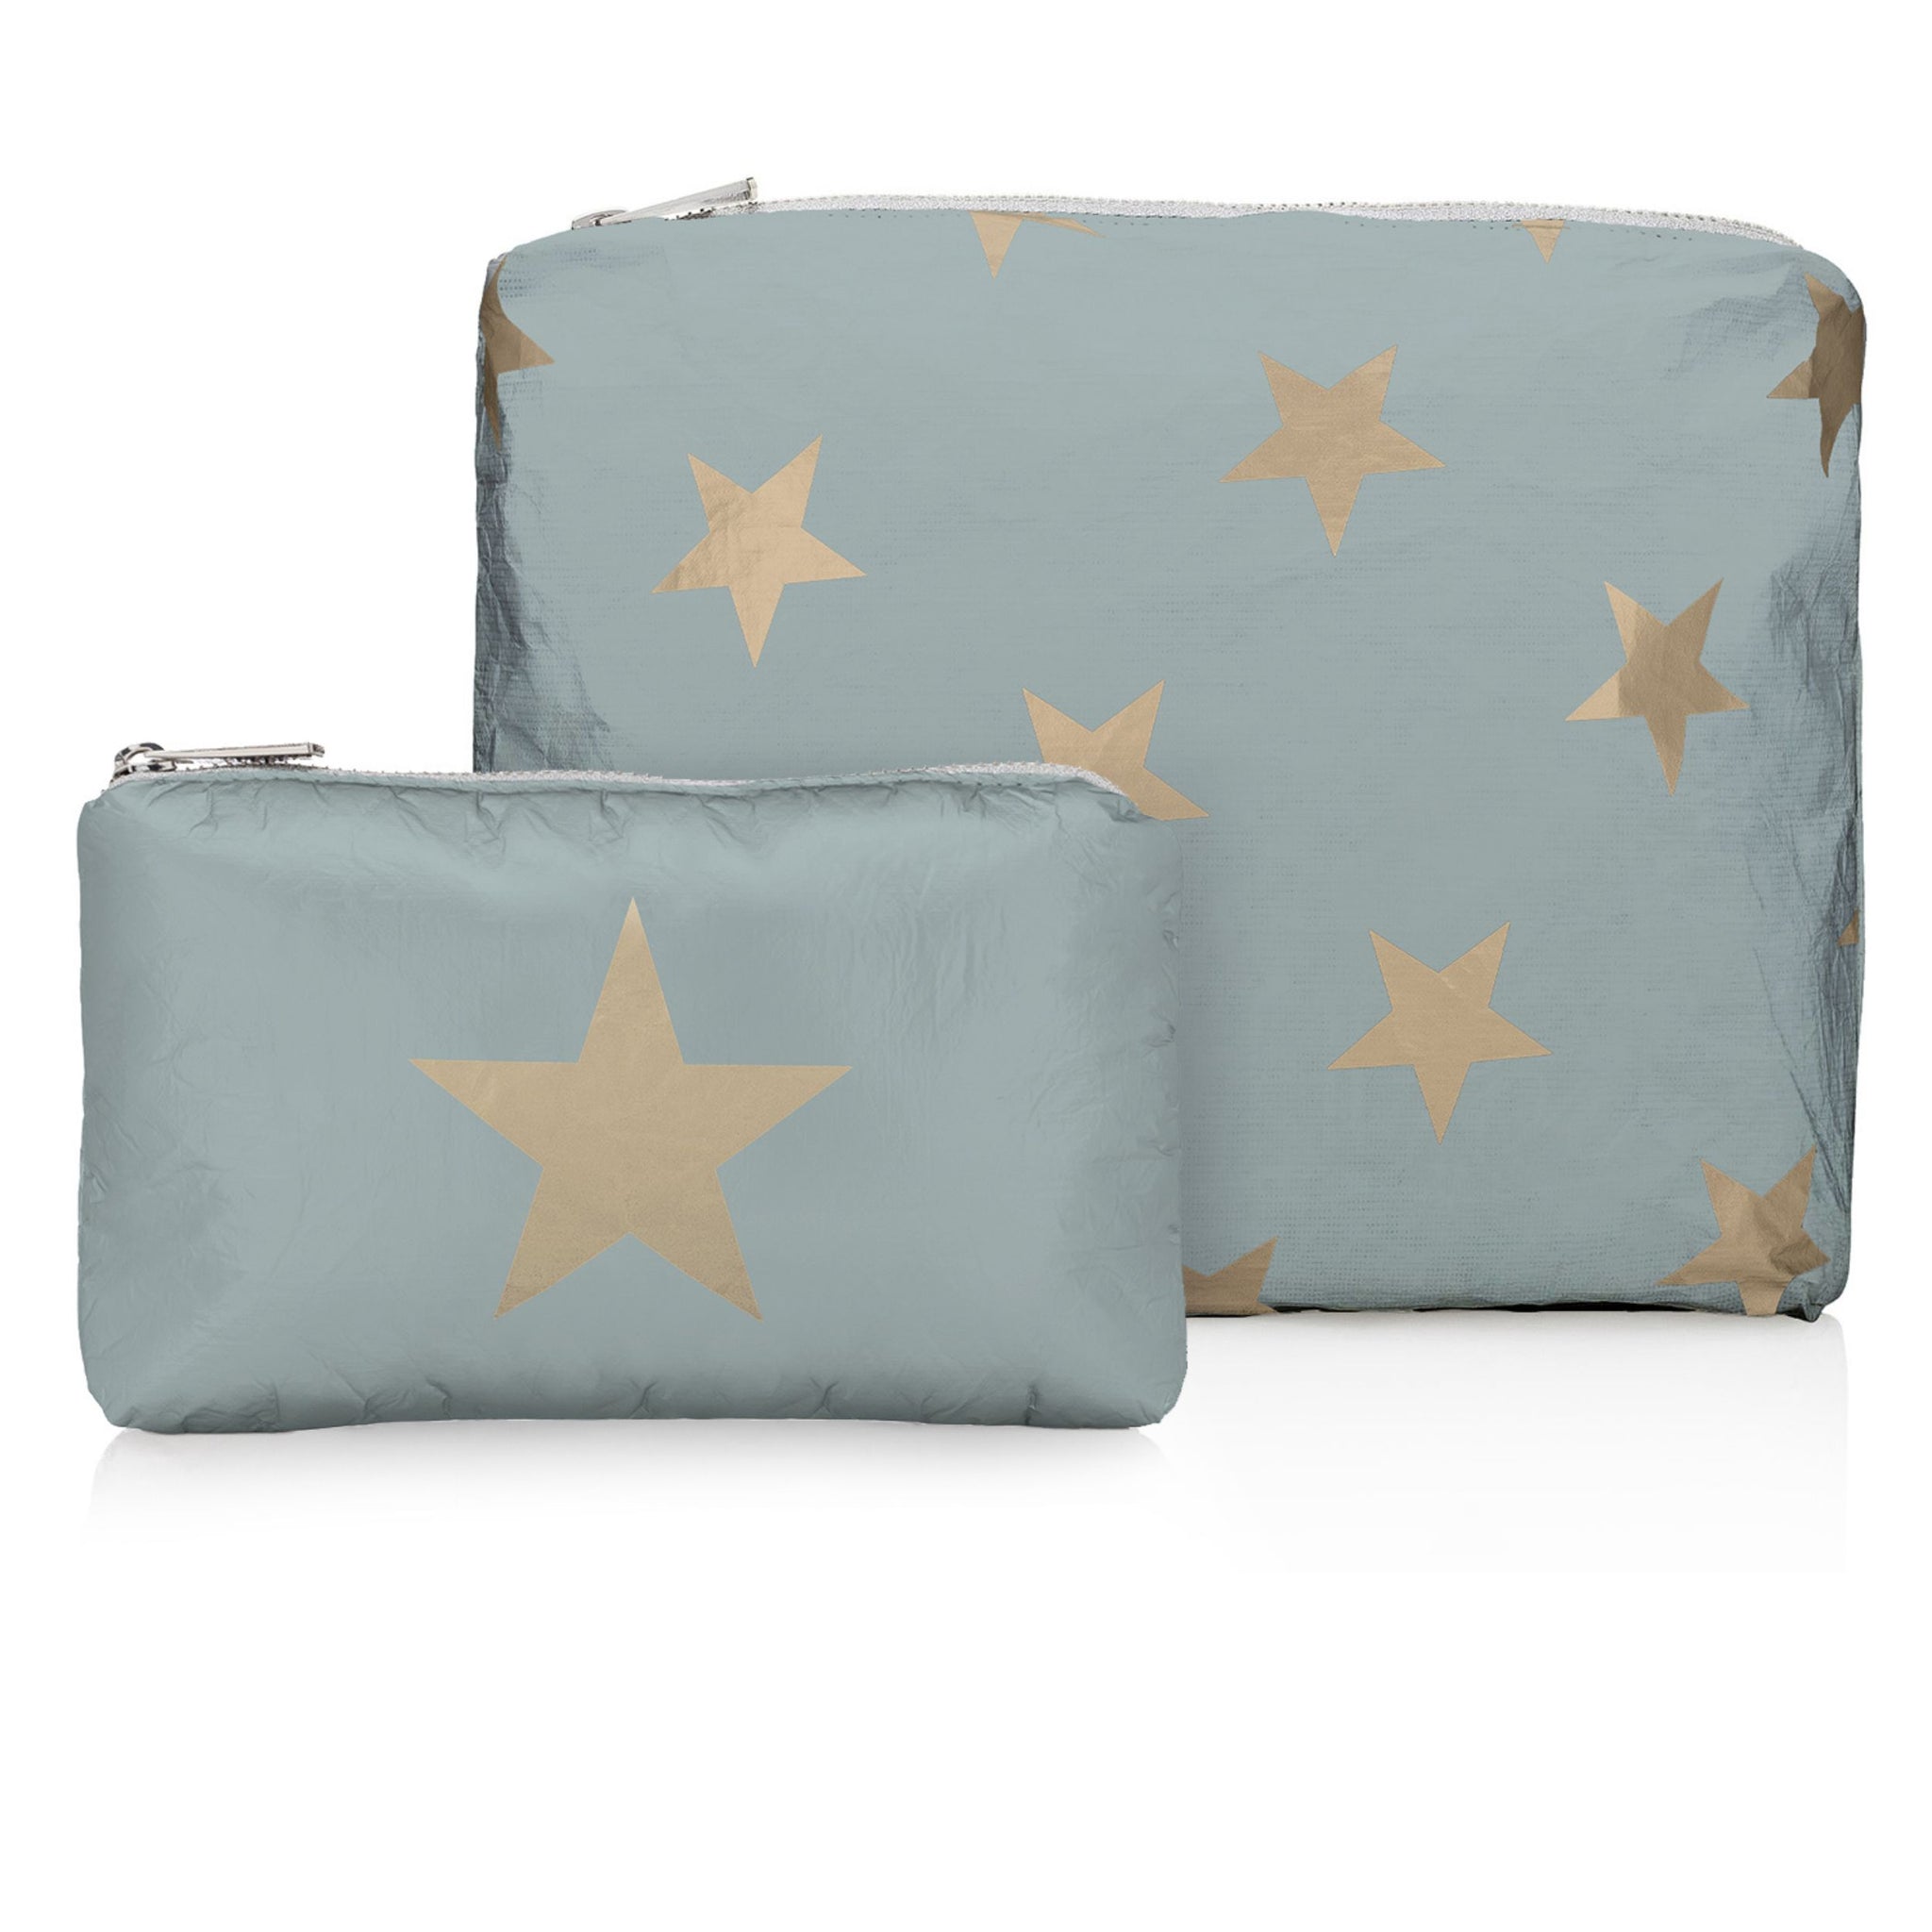 Set of Two - Organizational Packs - Shimmer Gray with Multi Golden Stars